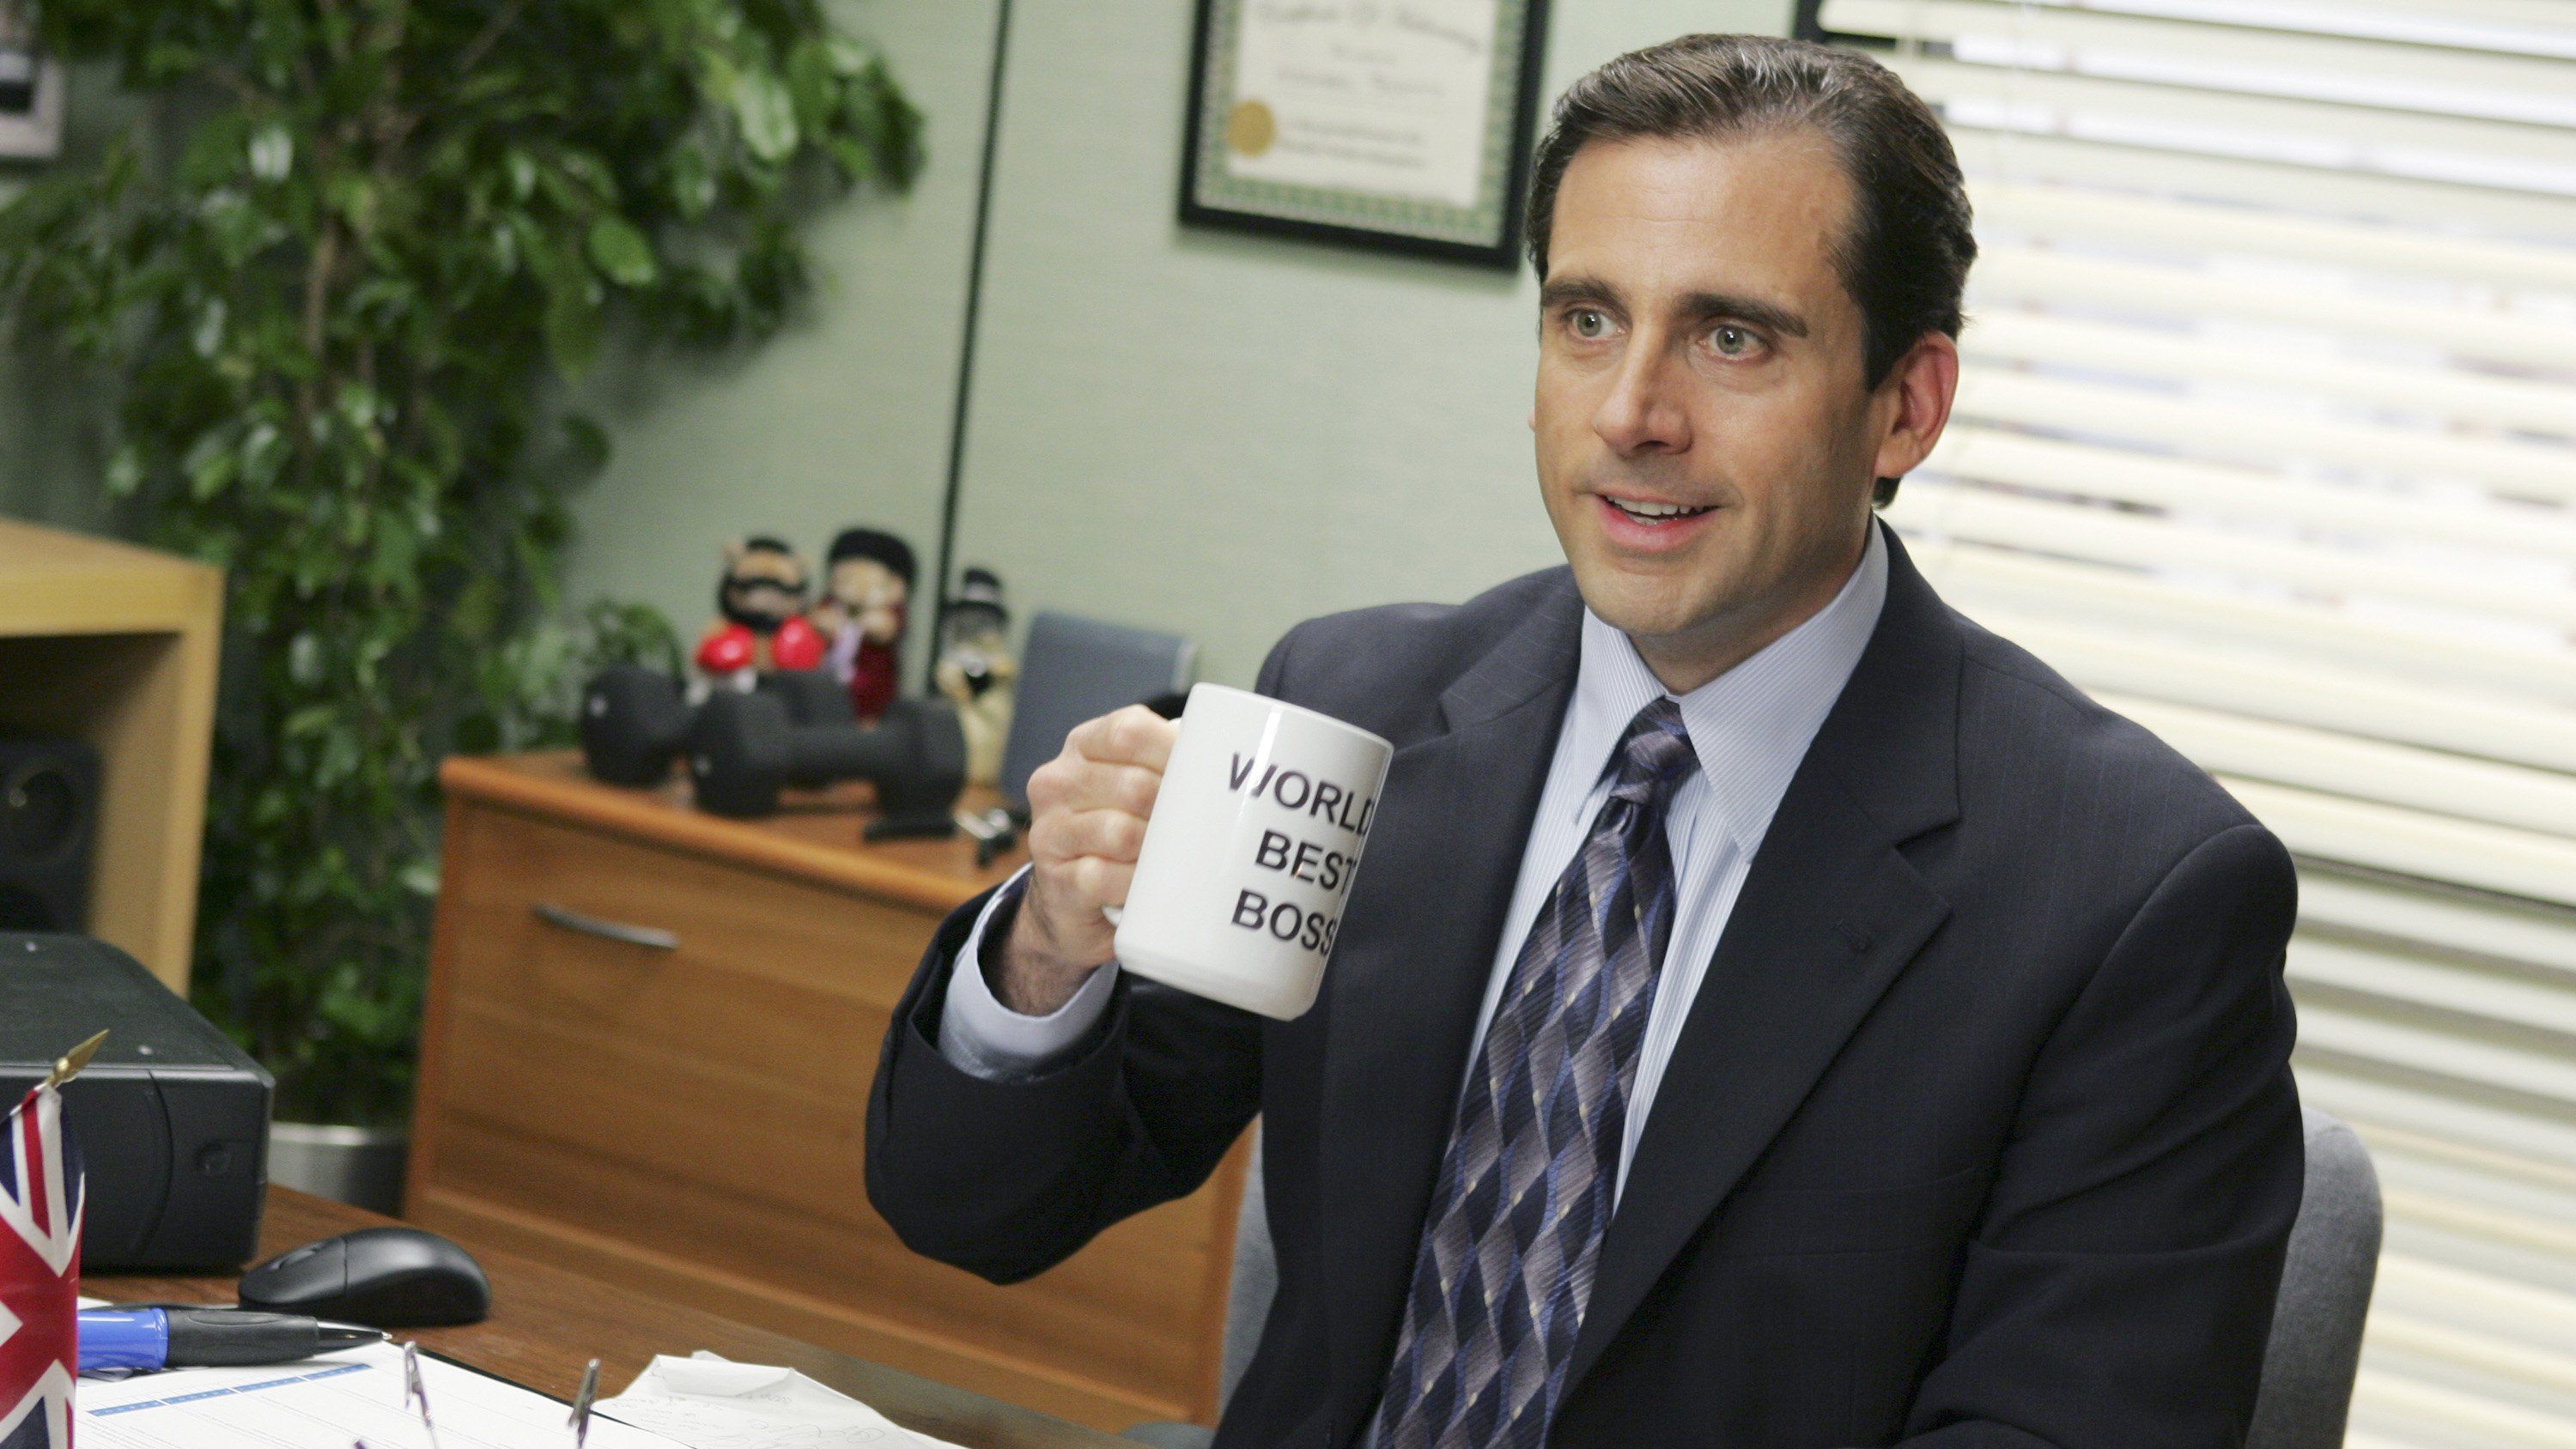 Why Did Michael Scott Leave The Office in Season 7?